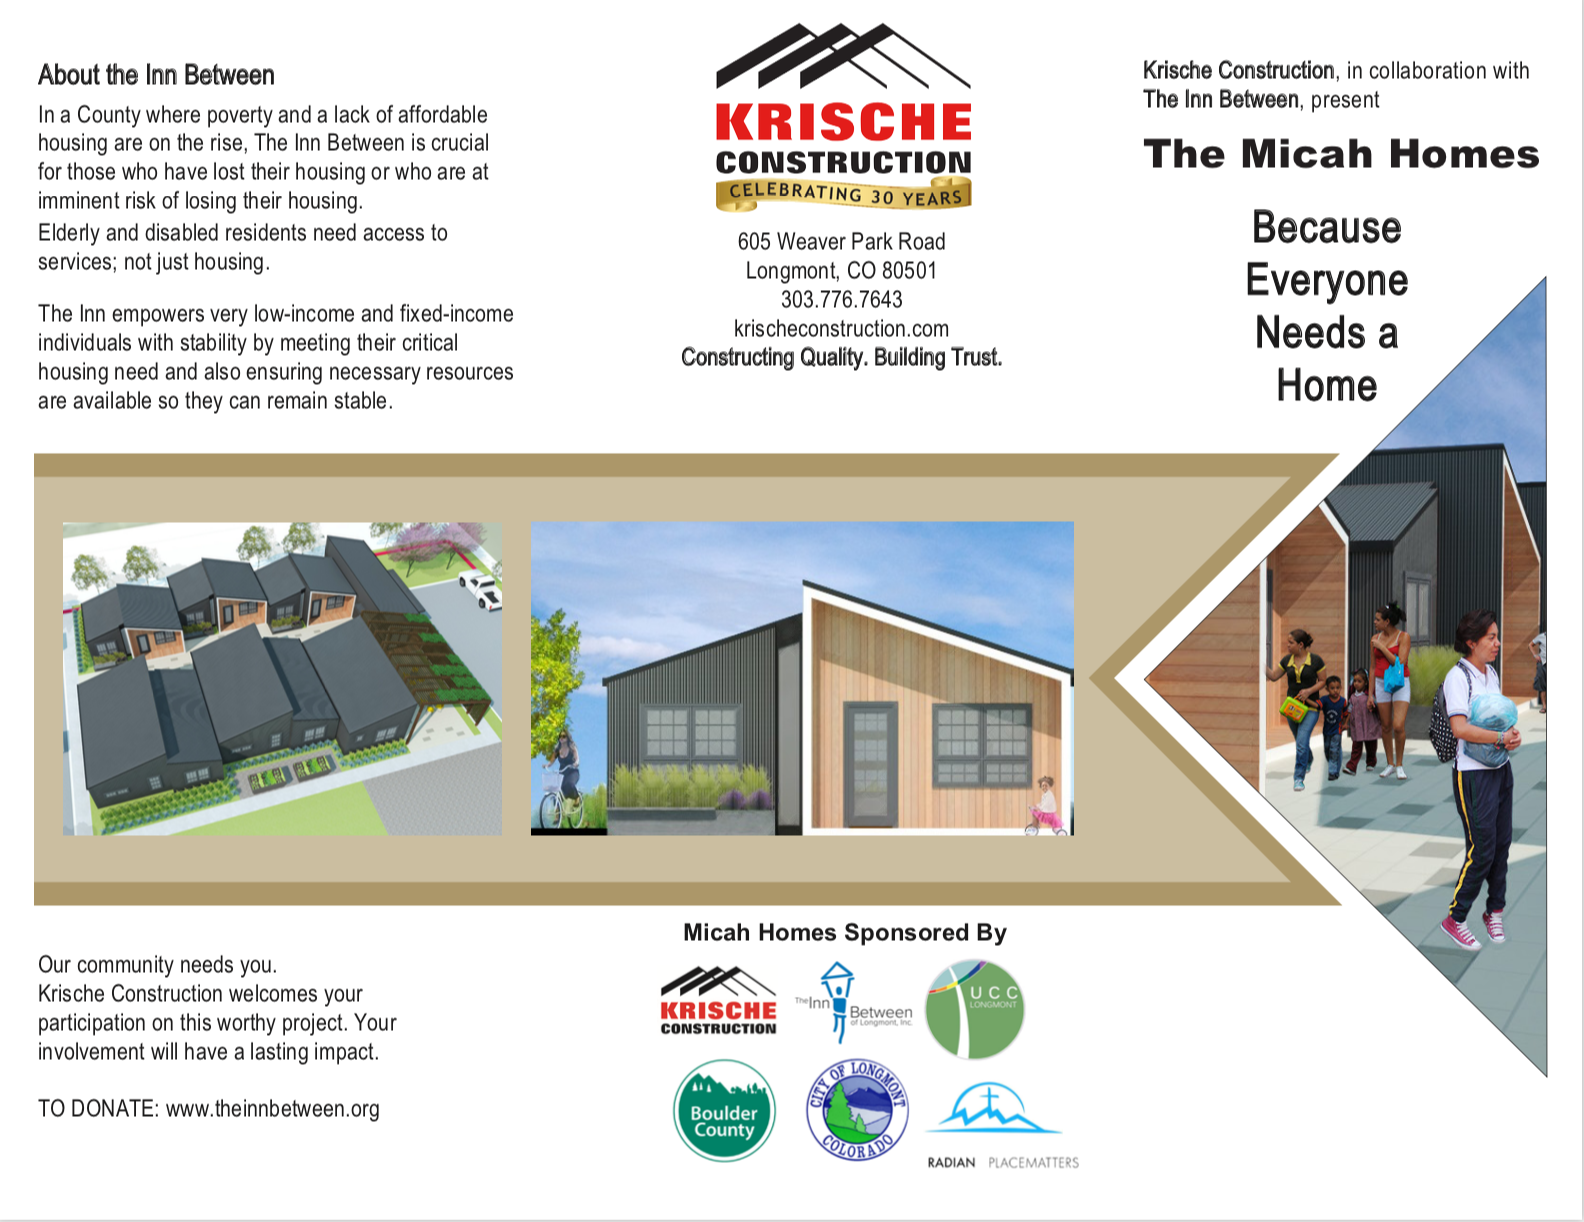 micah homes project of the inn between